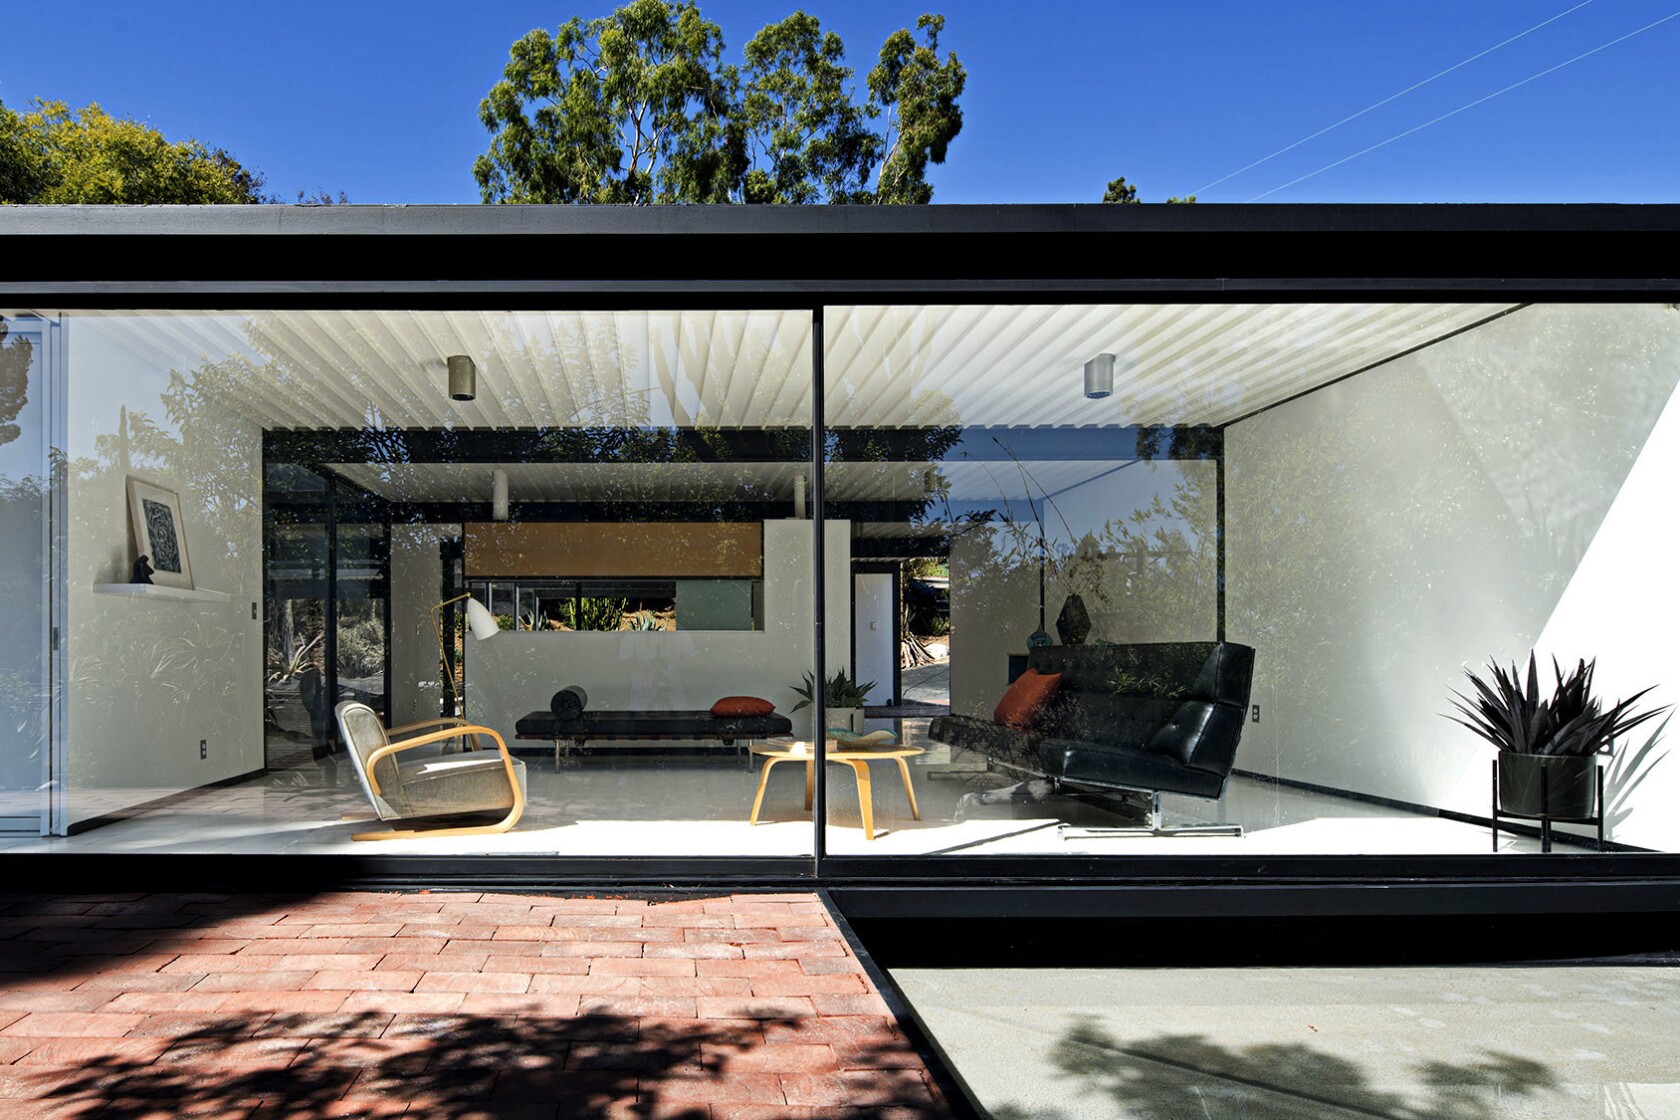 Case Study Houses: An In depth Look At Mid Century Architectural Gems